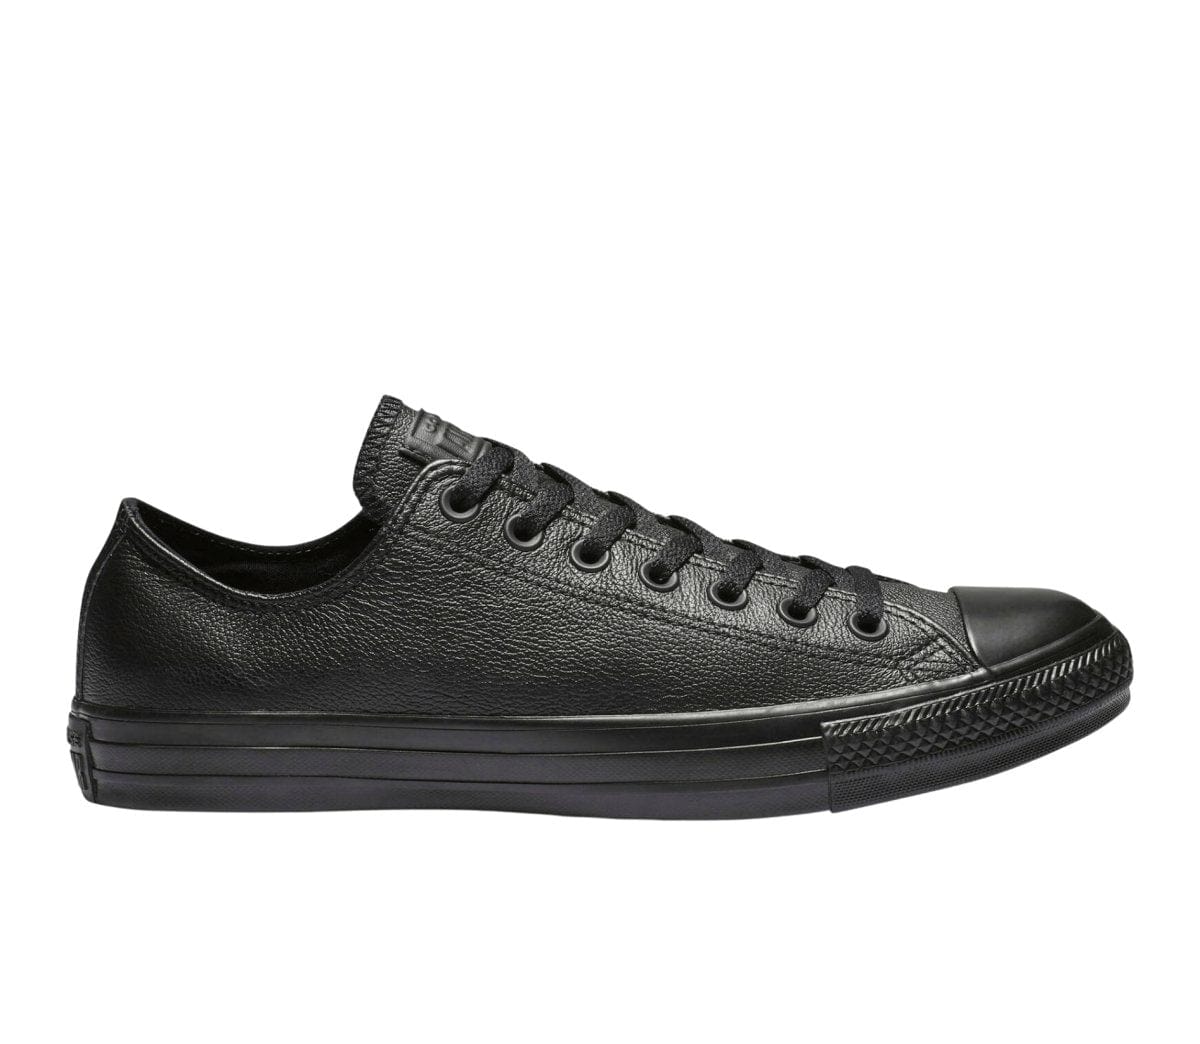 Converse CONVERSE WOMEN'S CHUCK TAYLOR ALL STAR LOW TOP TRIPLE BLACK LEATHER SHOE - INSPORT